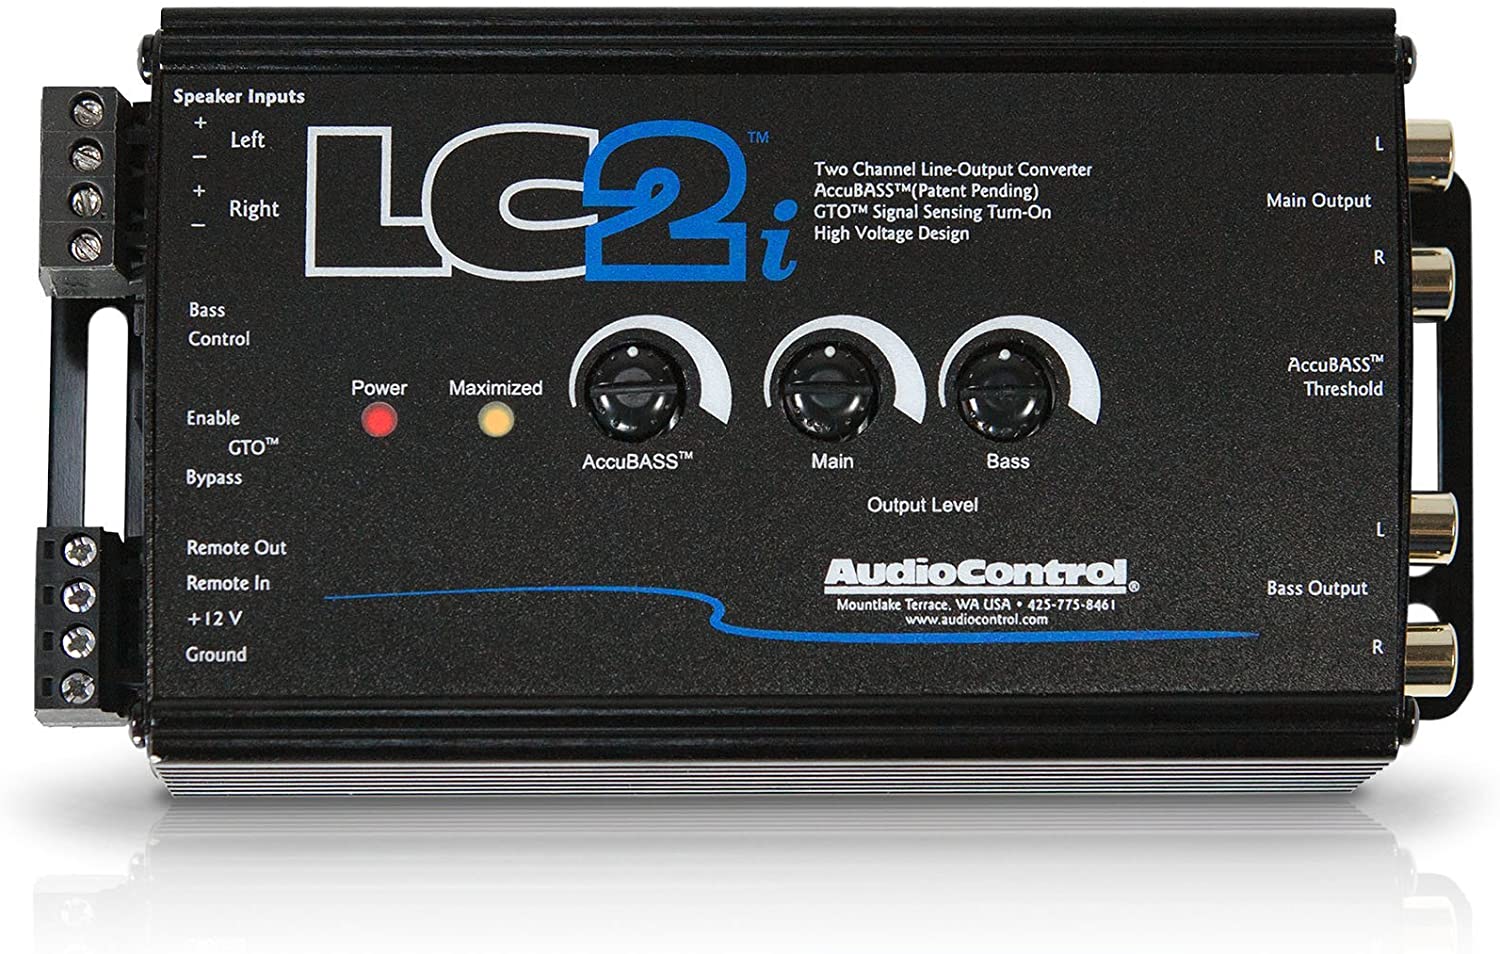 AudioControl LC2i 2 Channel Line Out Converter Wwith AccuBASS and Subwoofer Control (Standard Packaging)